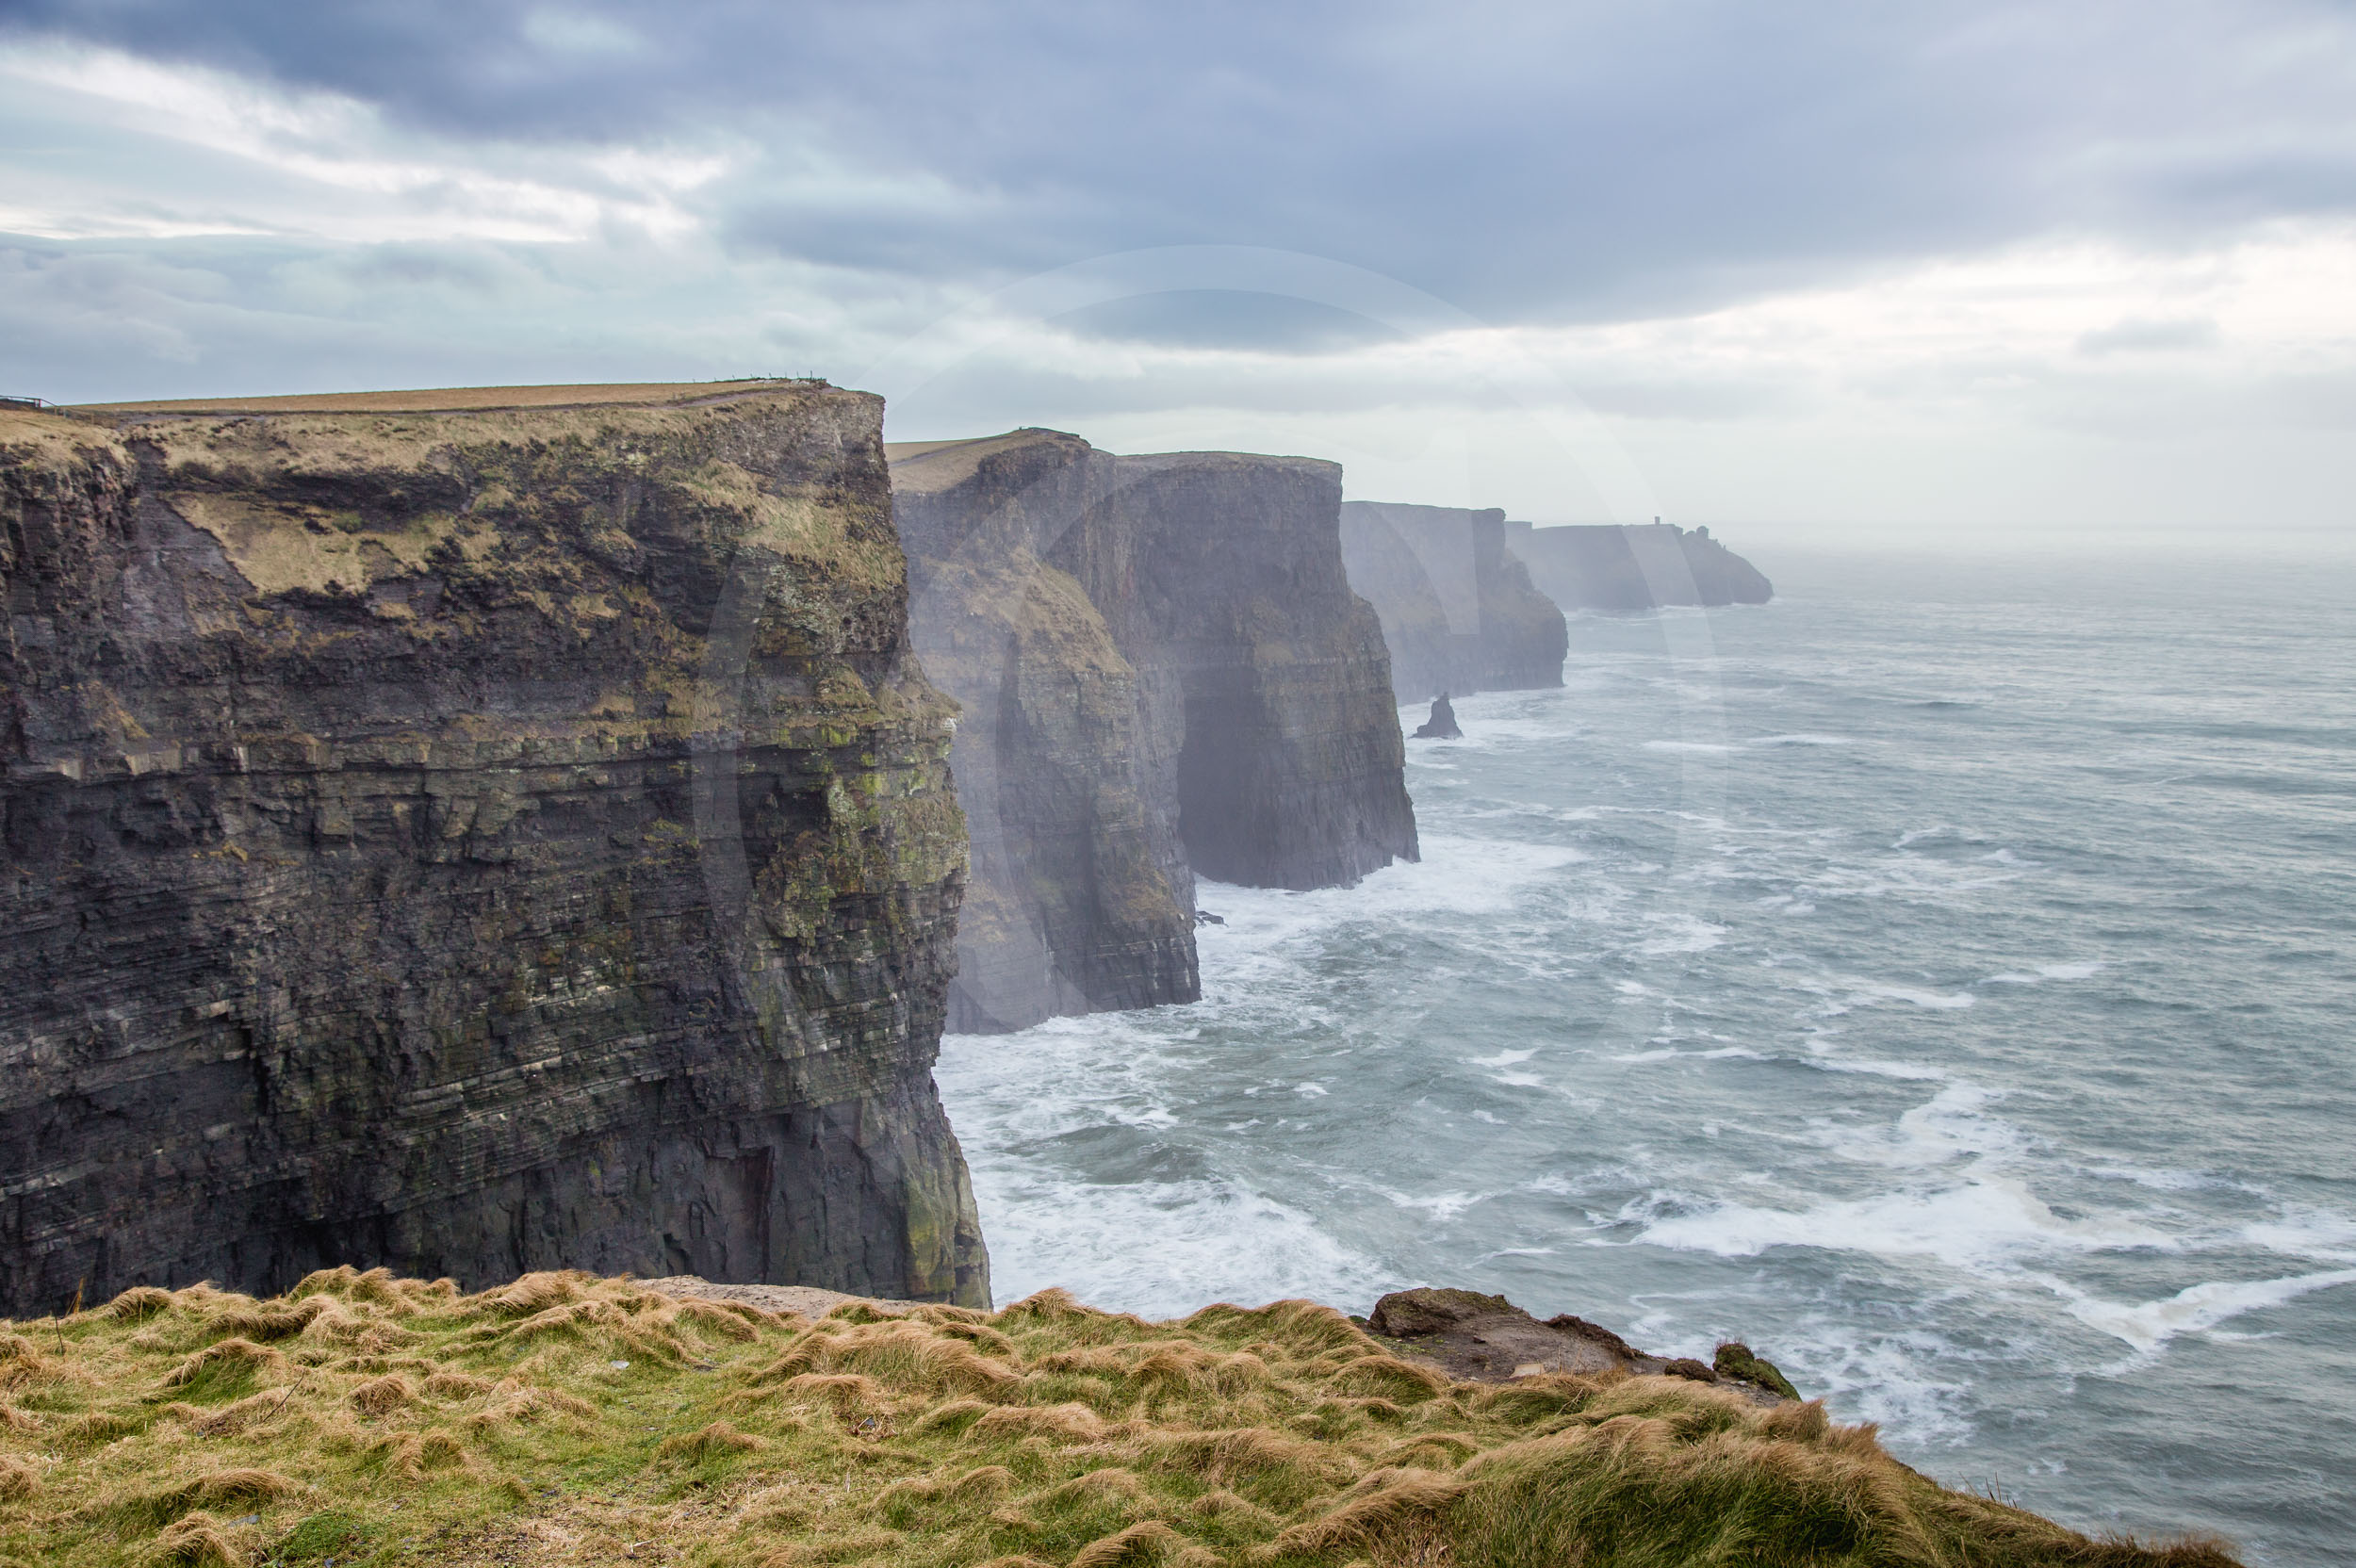 The Cliffs of Moher, Co Clare